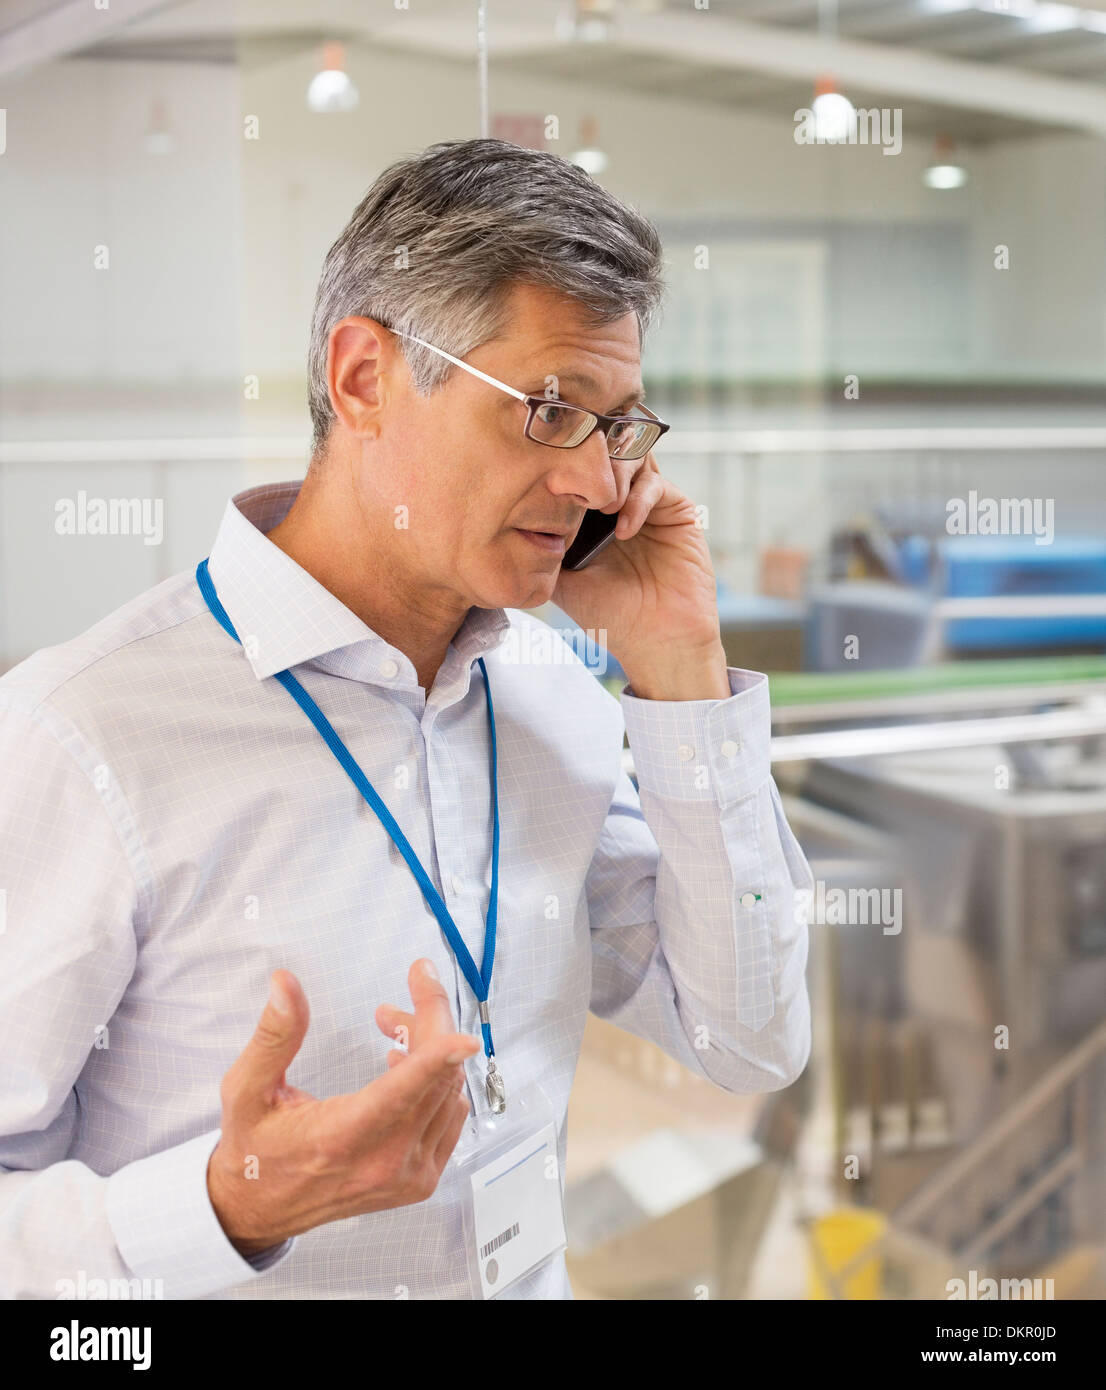 Businessman talking on cell phone Stock Photo